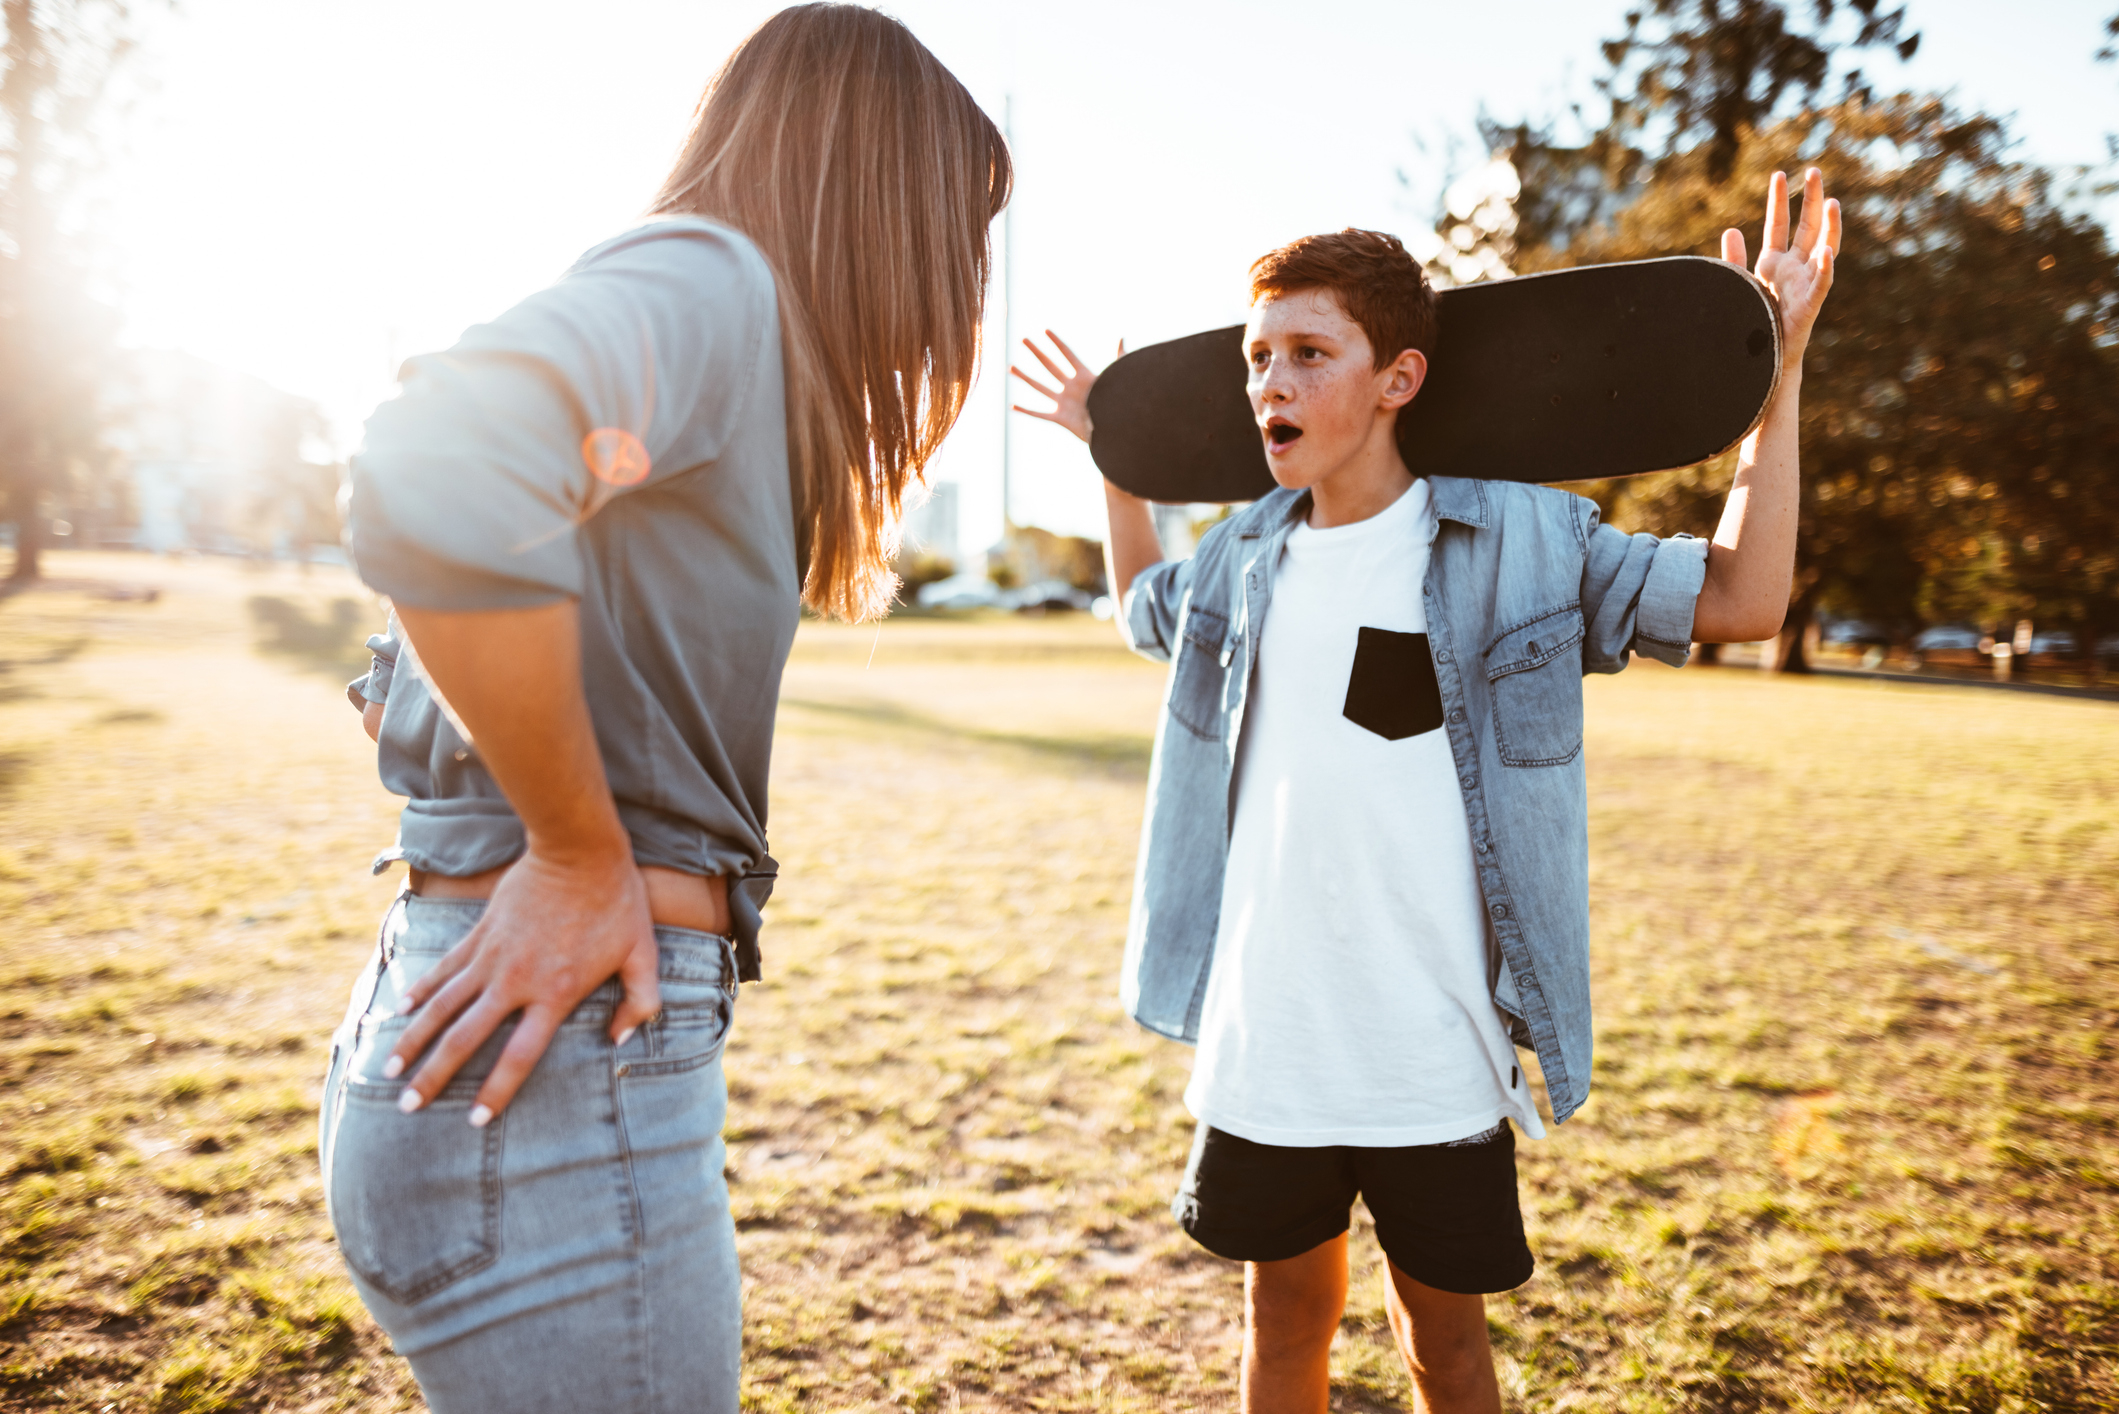 A mother speaking to her son who is holding a skateboard in a park